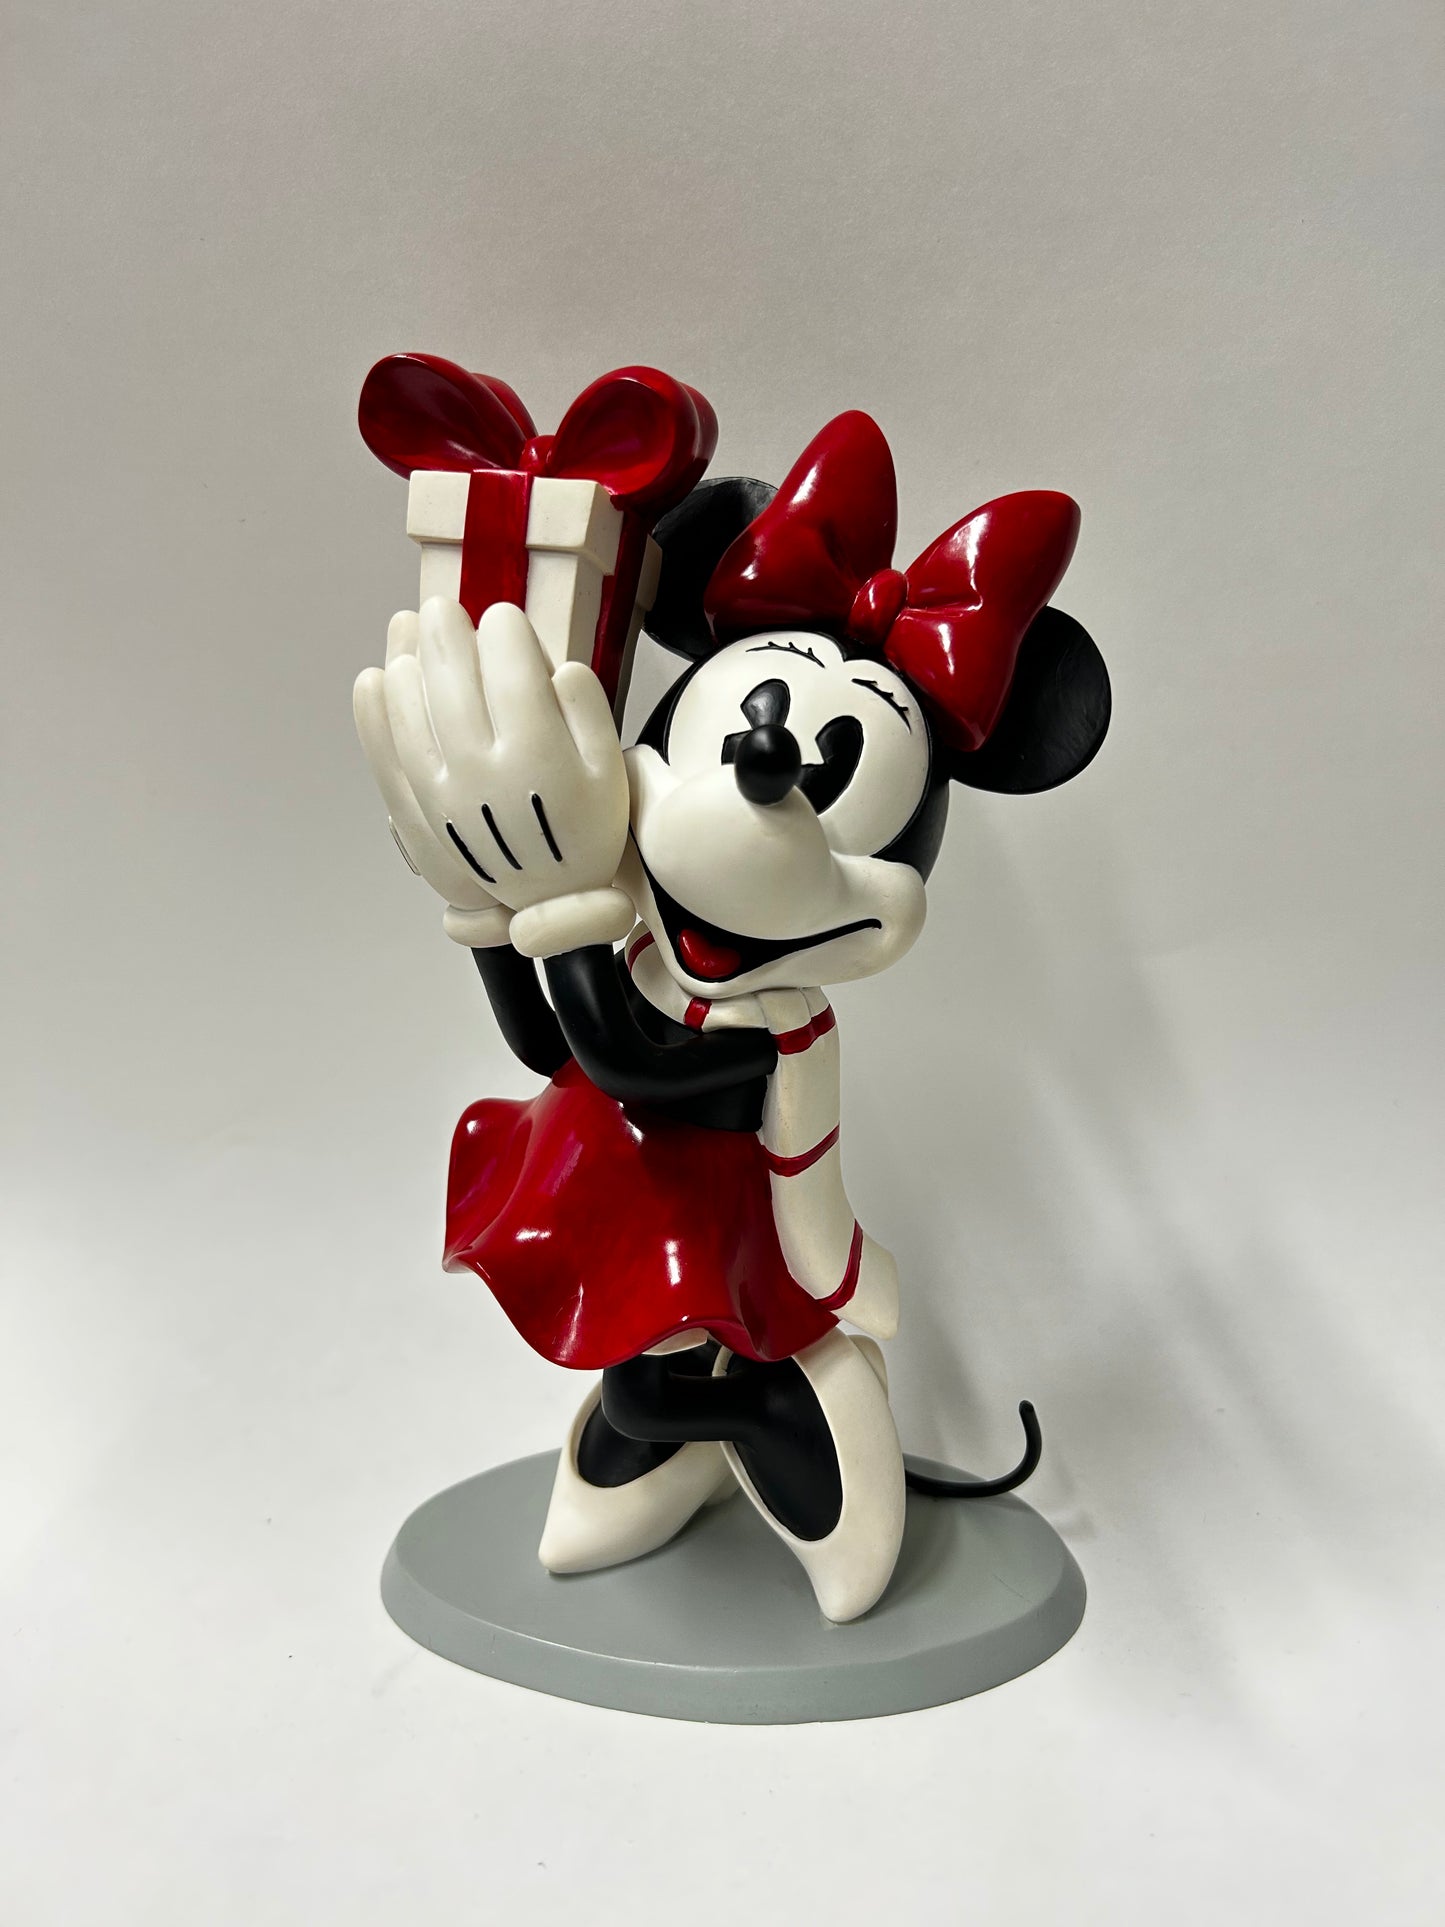 Mickey en Minnie Mouse beeld ‘A christmouse gift’